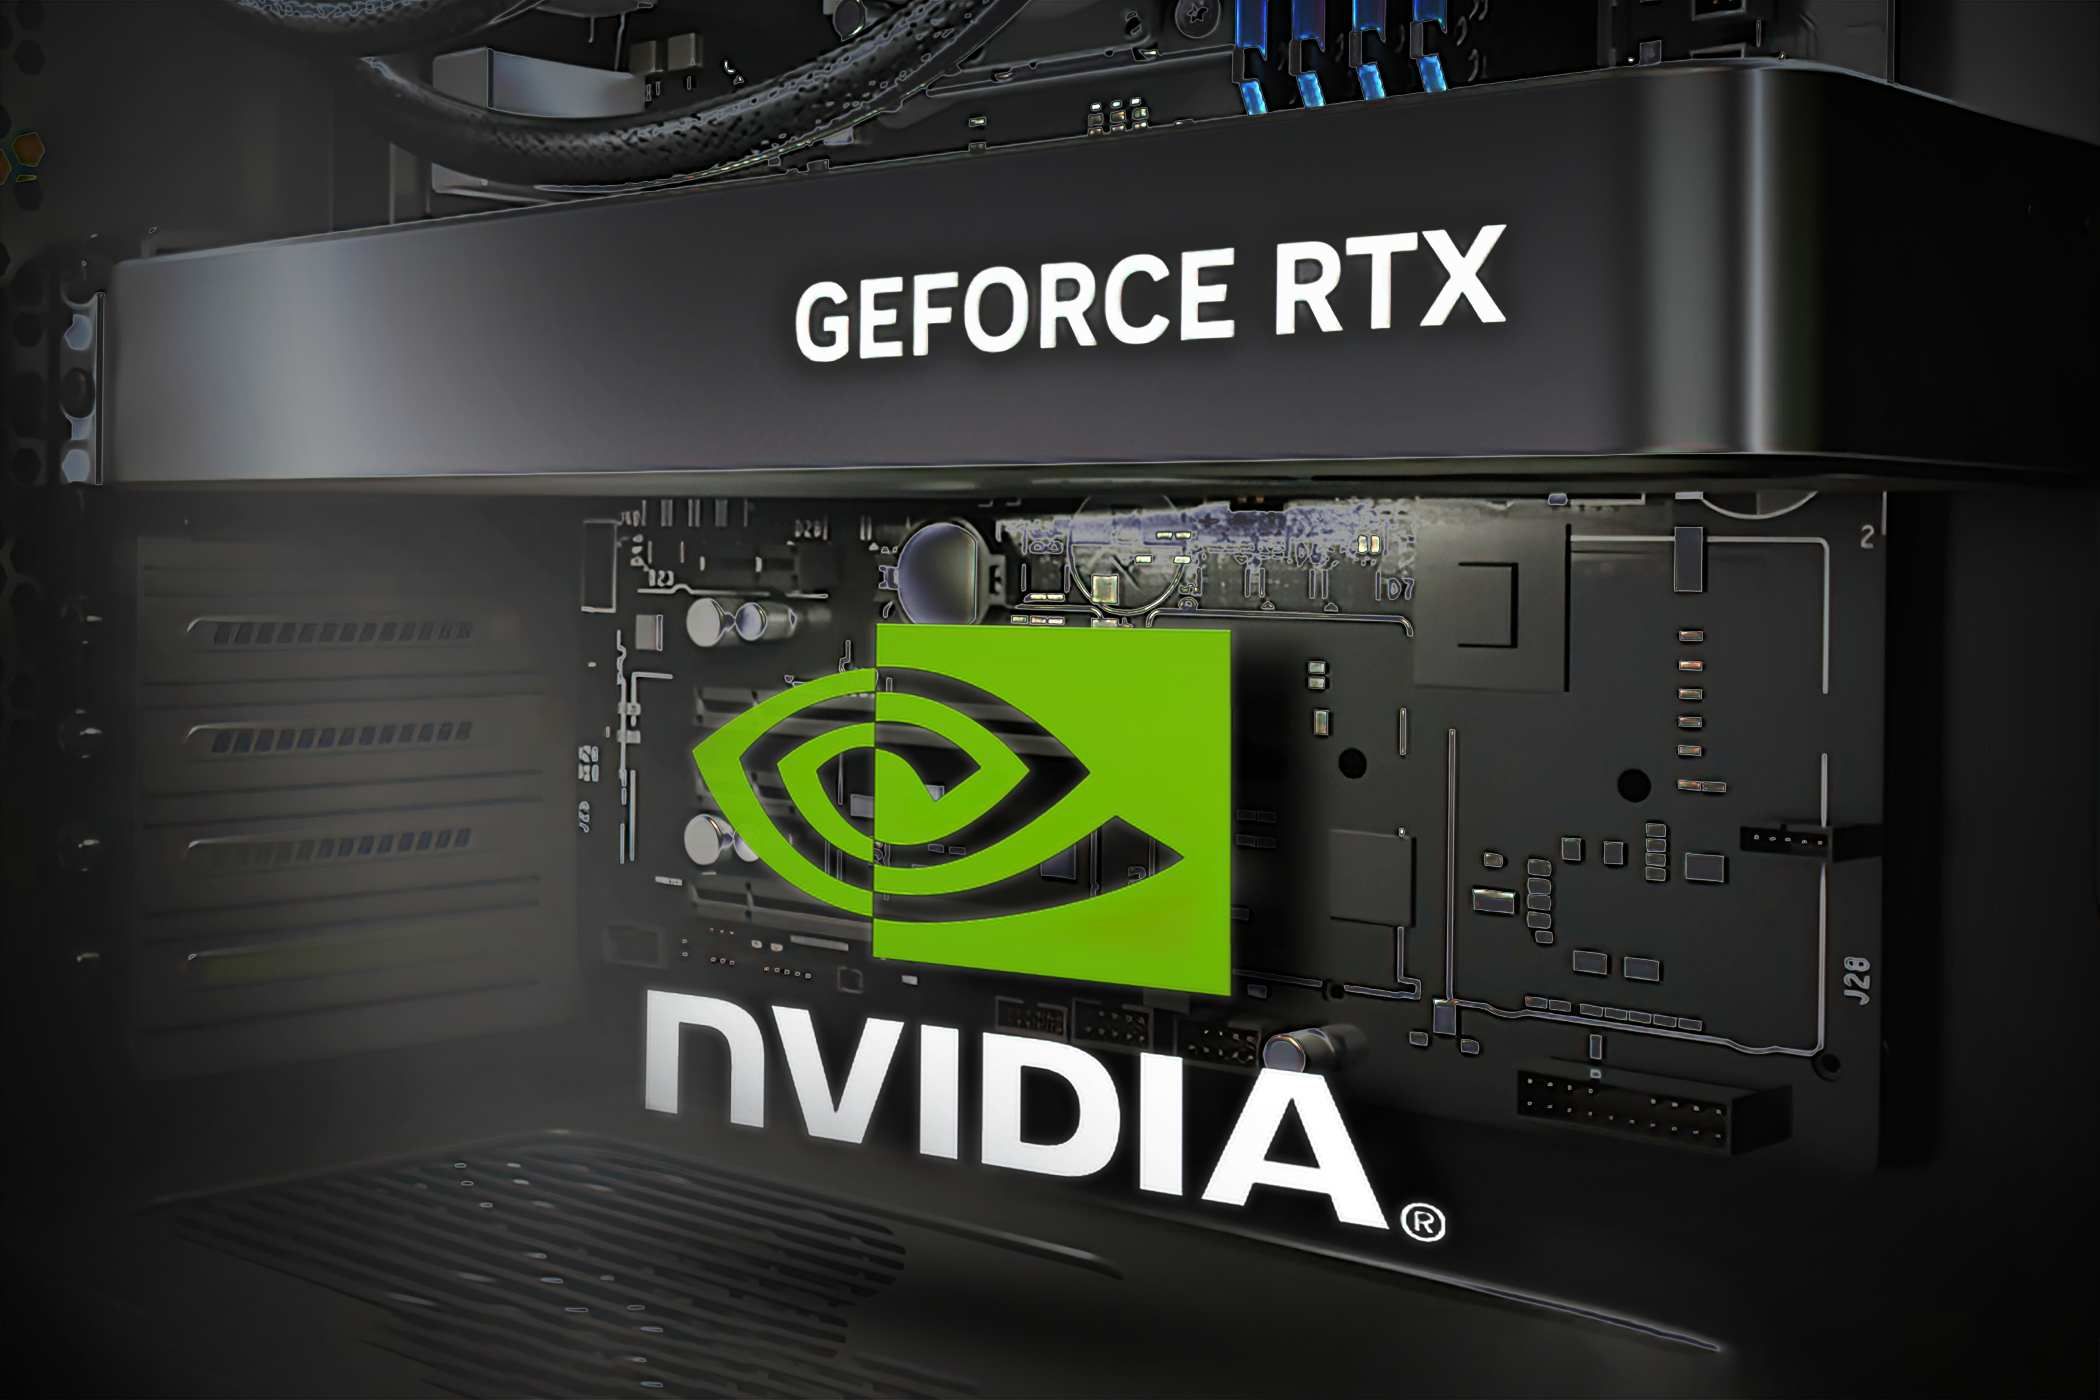 A Geforce RTX and NVIDIA logo